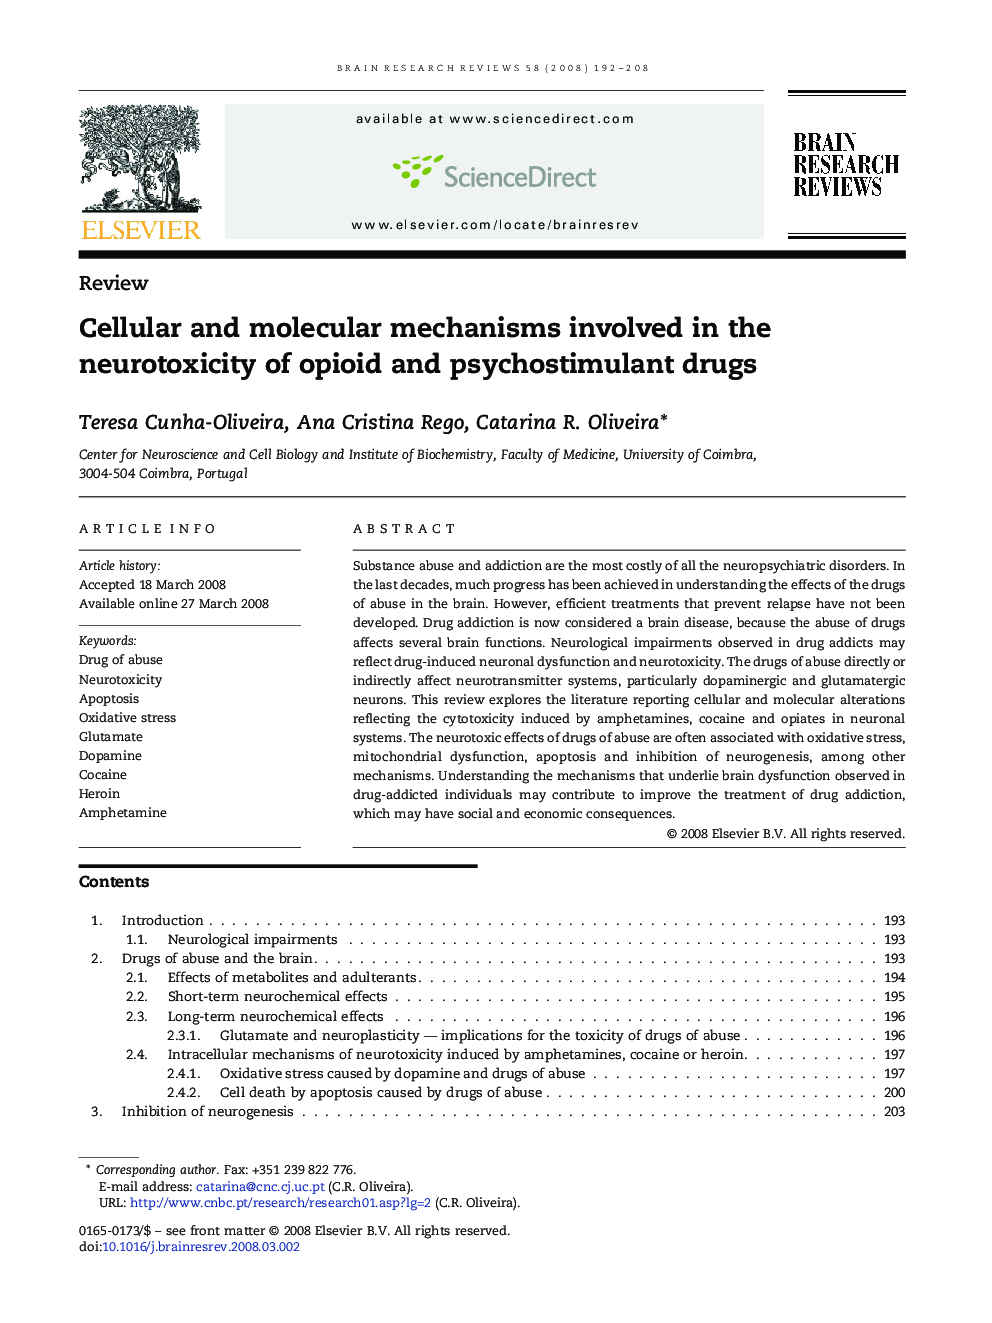 Cellular and molecular mechanisms involved in the neurotoxicity of opioid and psychostimulant drugs